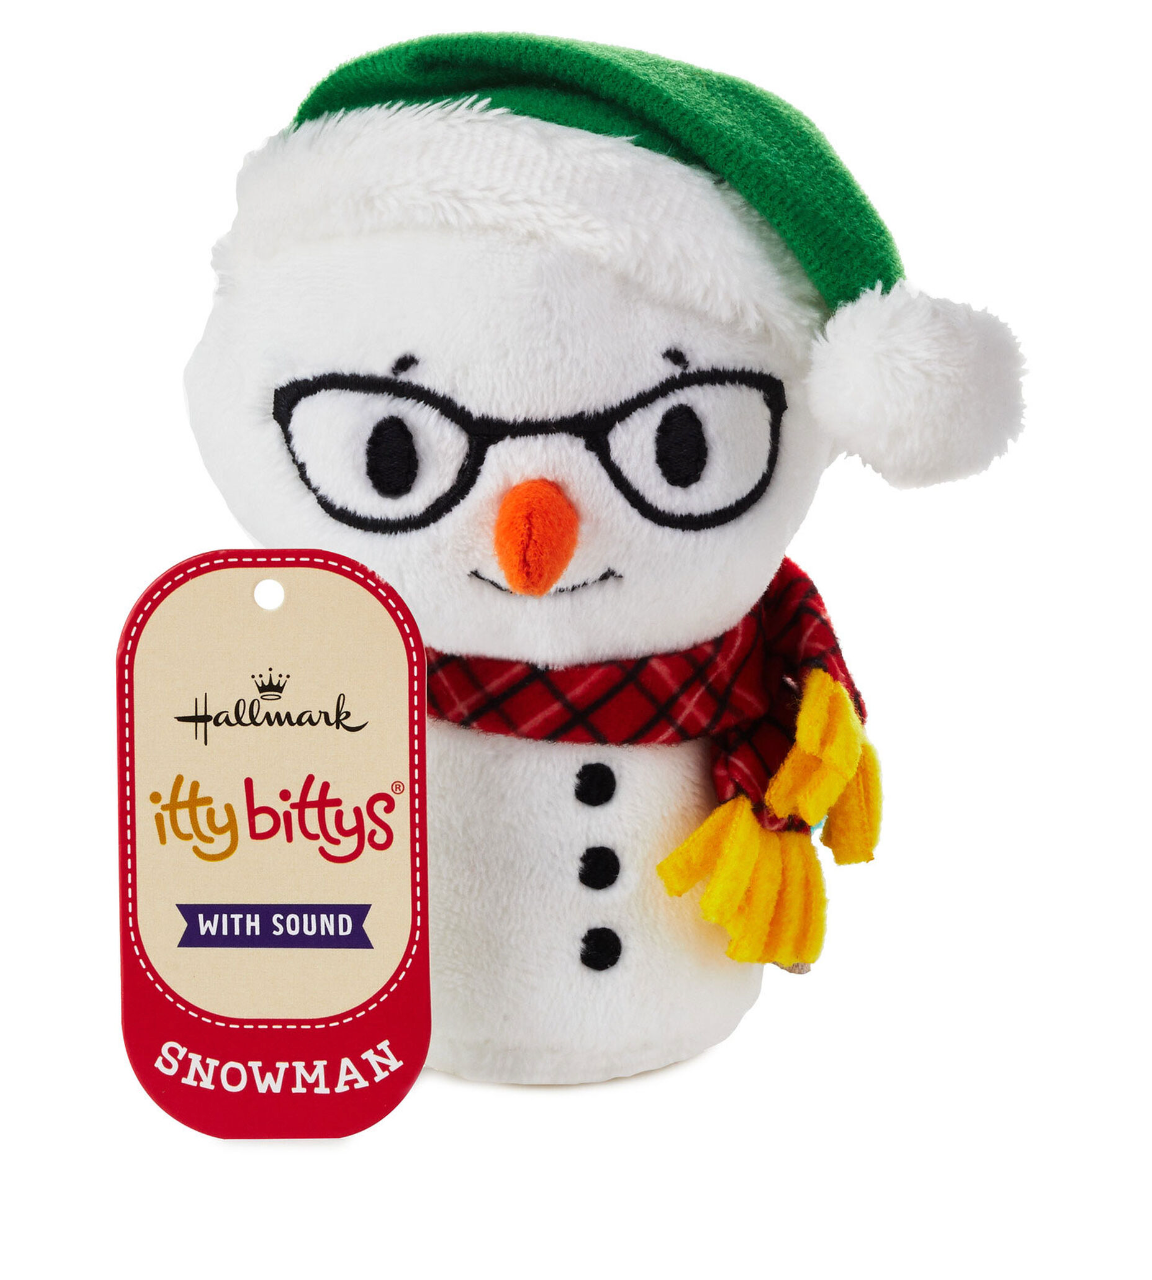 Hallmark Itty Bittys Snowman Holiday Christmas Talking Plush New with Tag